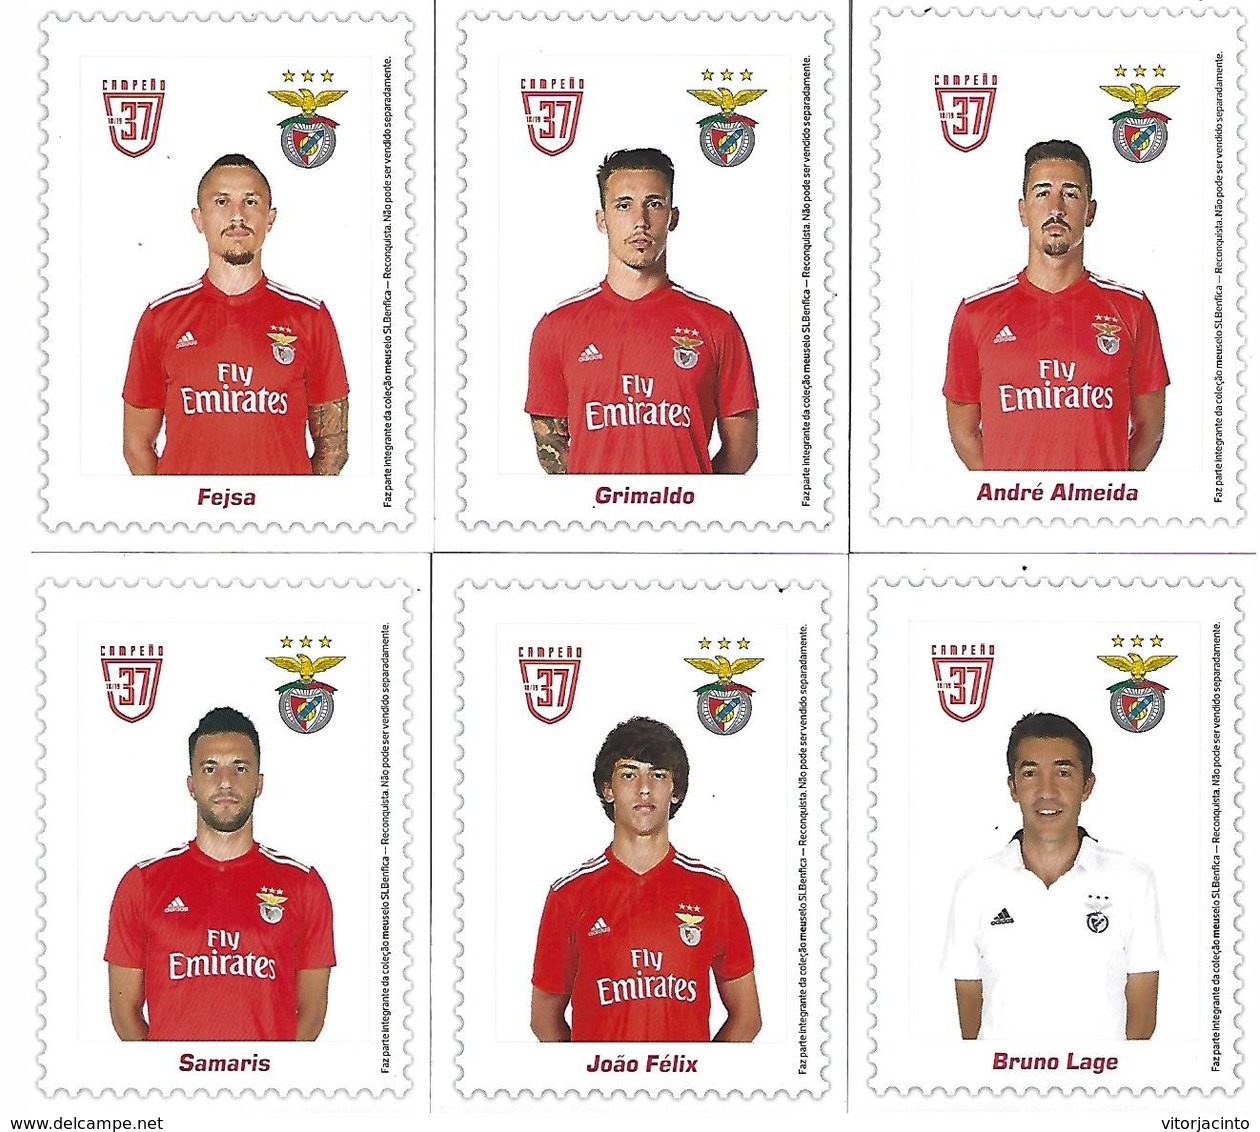 PORTUGAL - 12 Auto-adhesive My Stamp (meuselo), N20g - BENFICA Champion 37th + Post Card + 12 Magnets